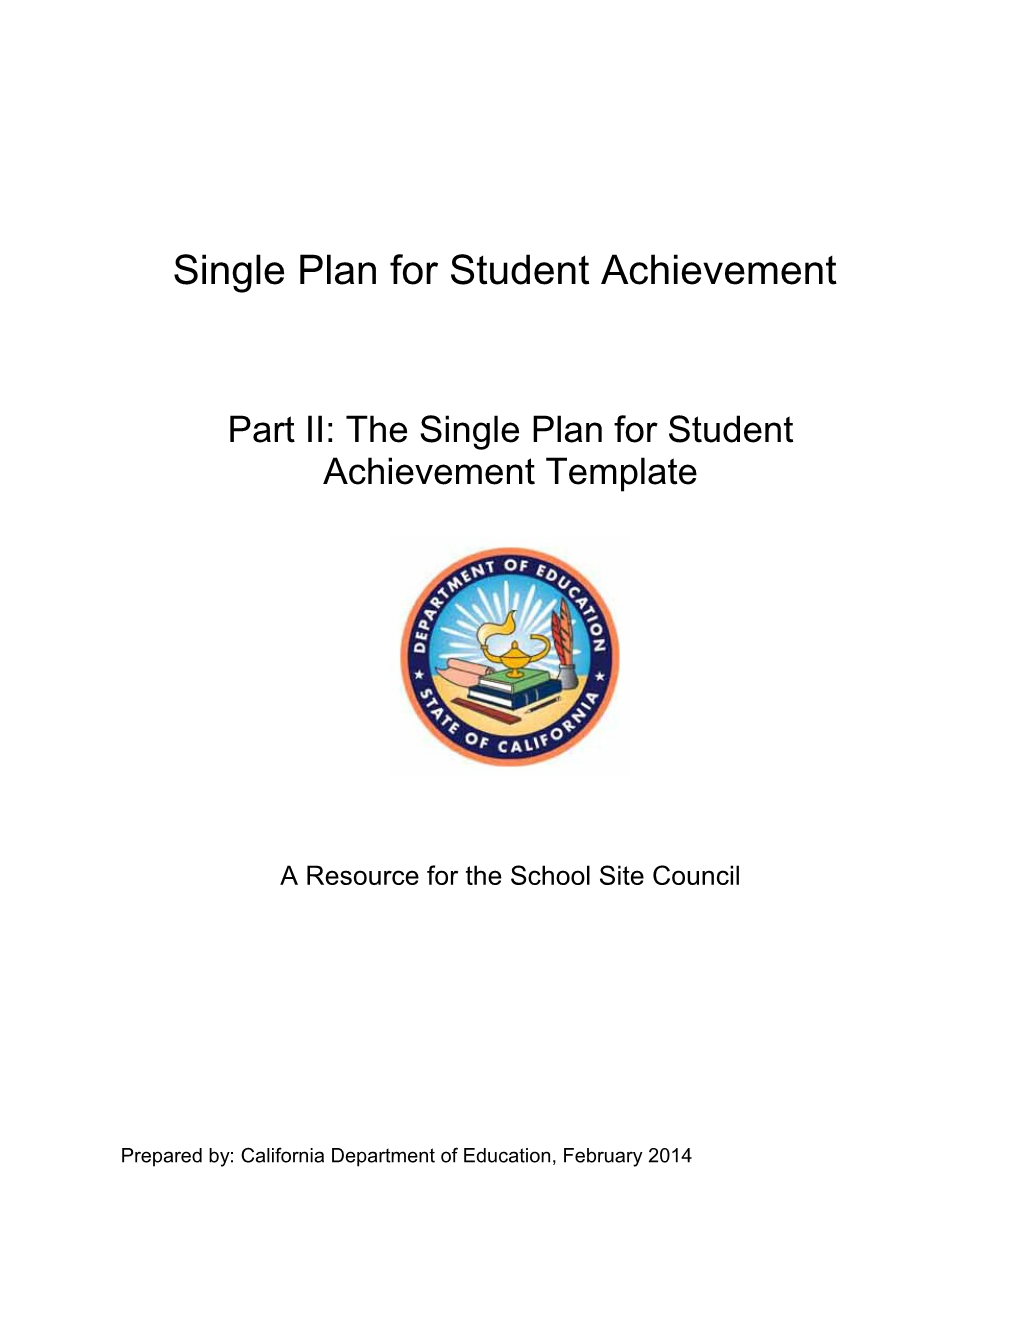 Single Plan For Student Achievement-Part II - Local Educational Agency Plan (CA Dept Of Education)